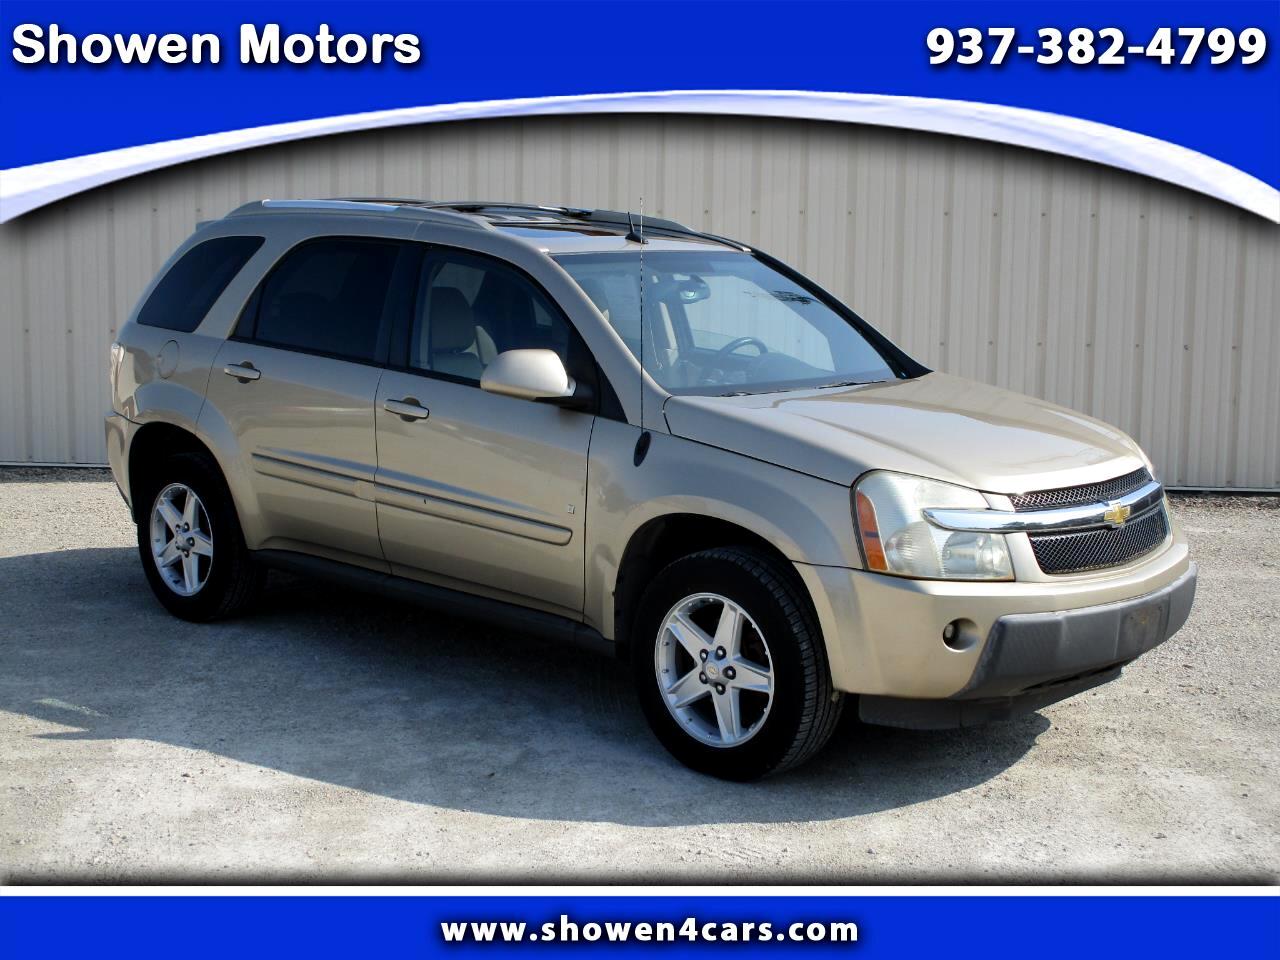 Used 2006 Chevrolet Equinox LT AWD for Sale in Wilmington